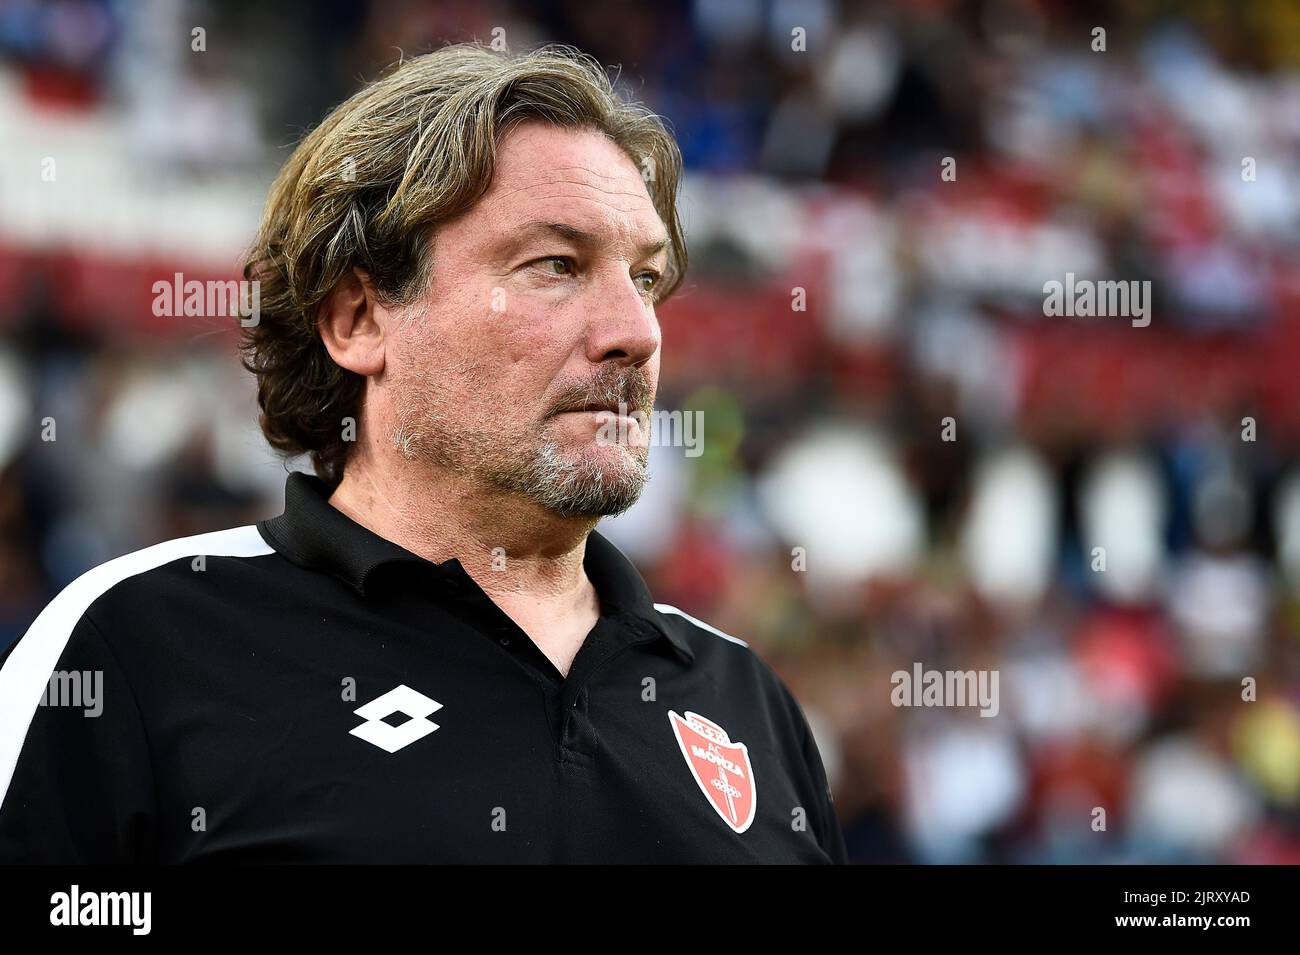 Monza, Italy. 26 August 2022. Giovanni Stroppa, head coach of AC Monza, looks on prior to the Serie A football match between AC Monza and Udinese Calcio. Credit: Nicolò Campo/Alamy Live News Stock Photo